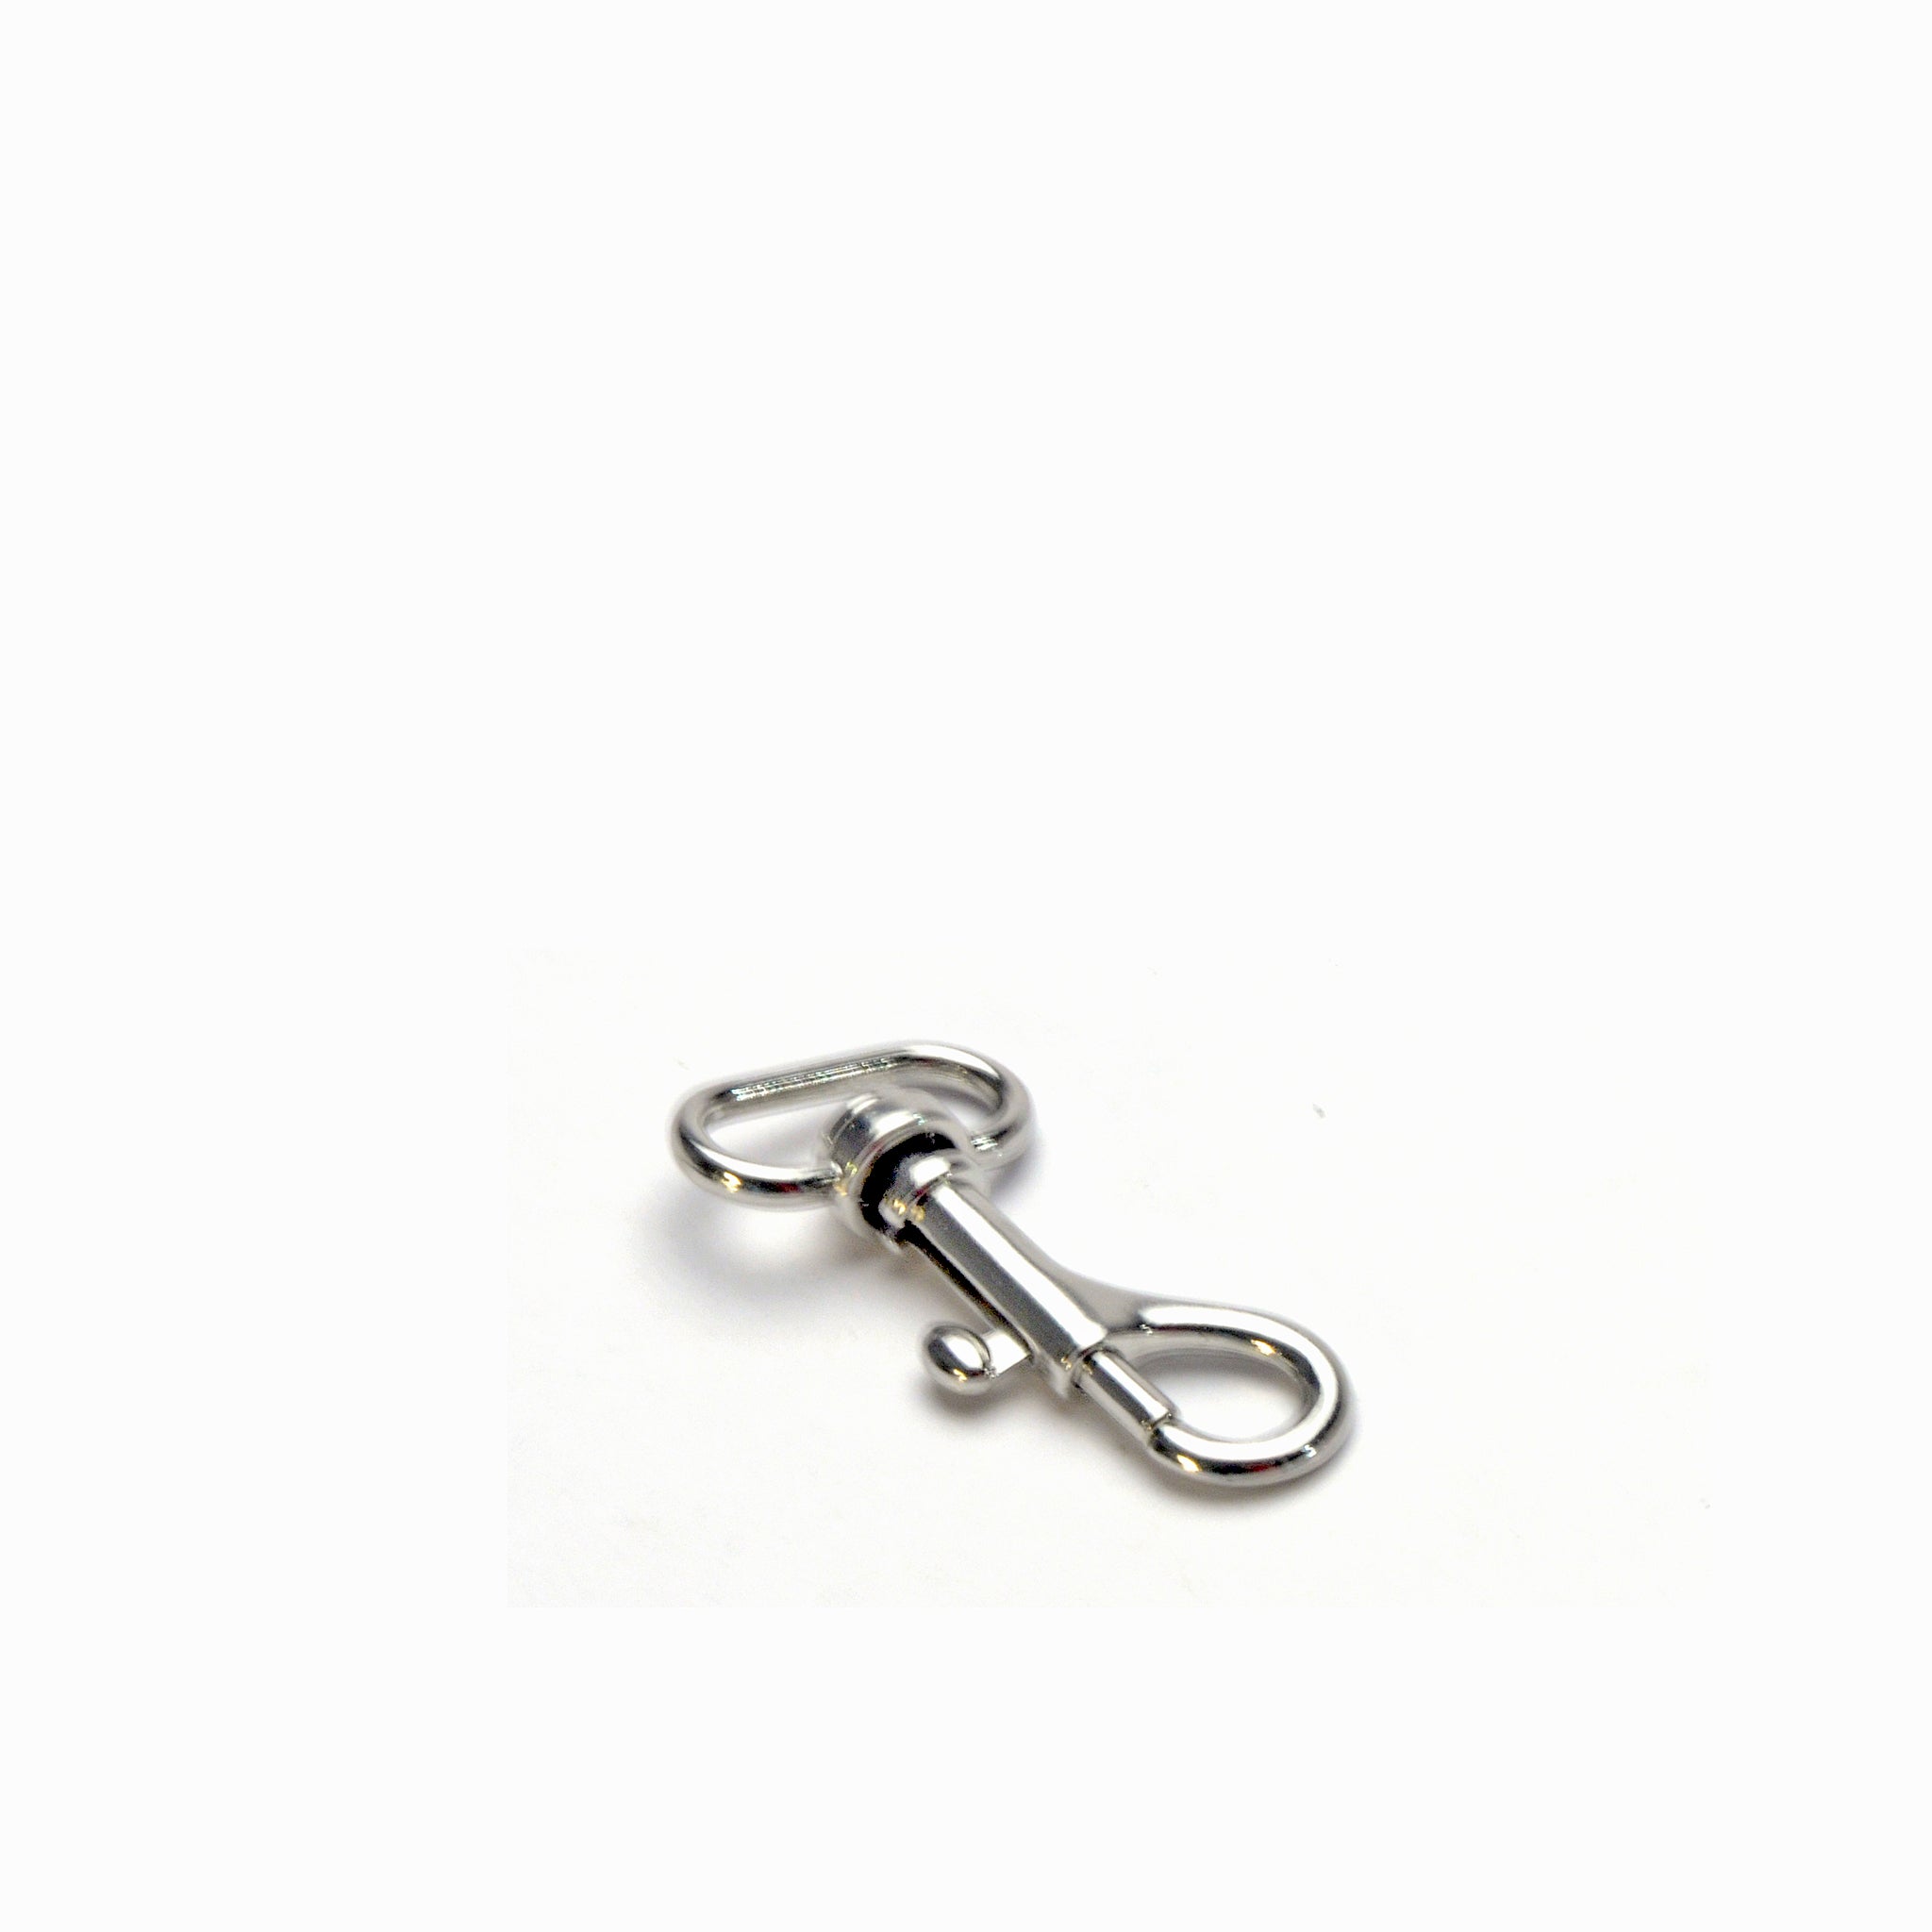 16mm Bag/All Purpose Swivel Clip - Nickel from Identity Leathercraft